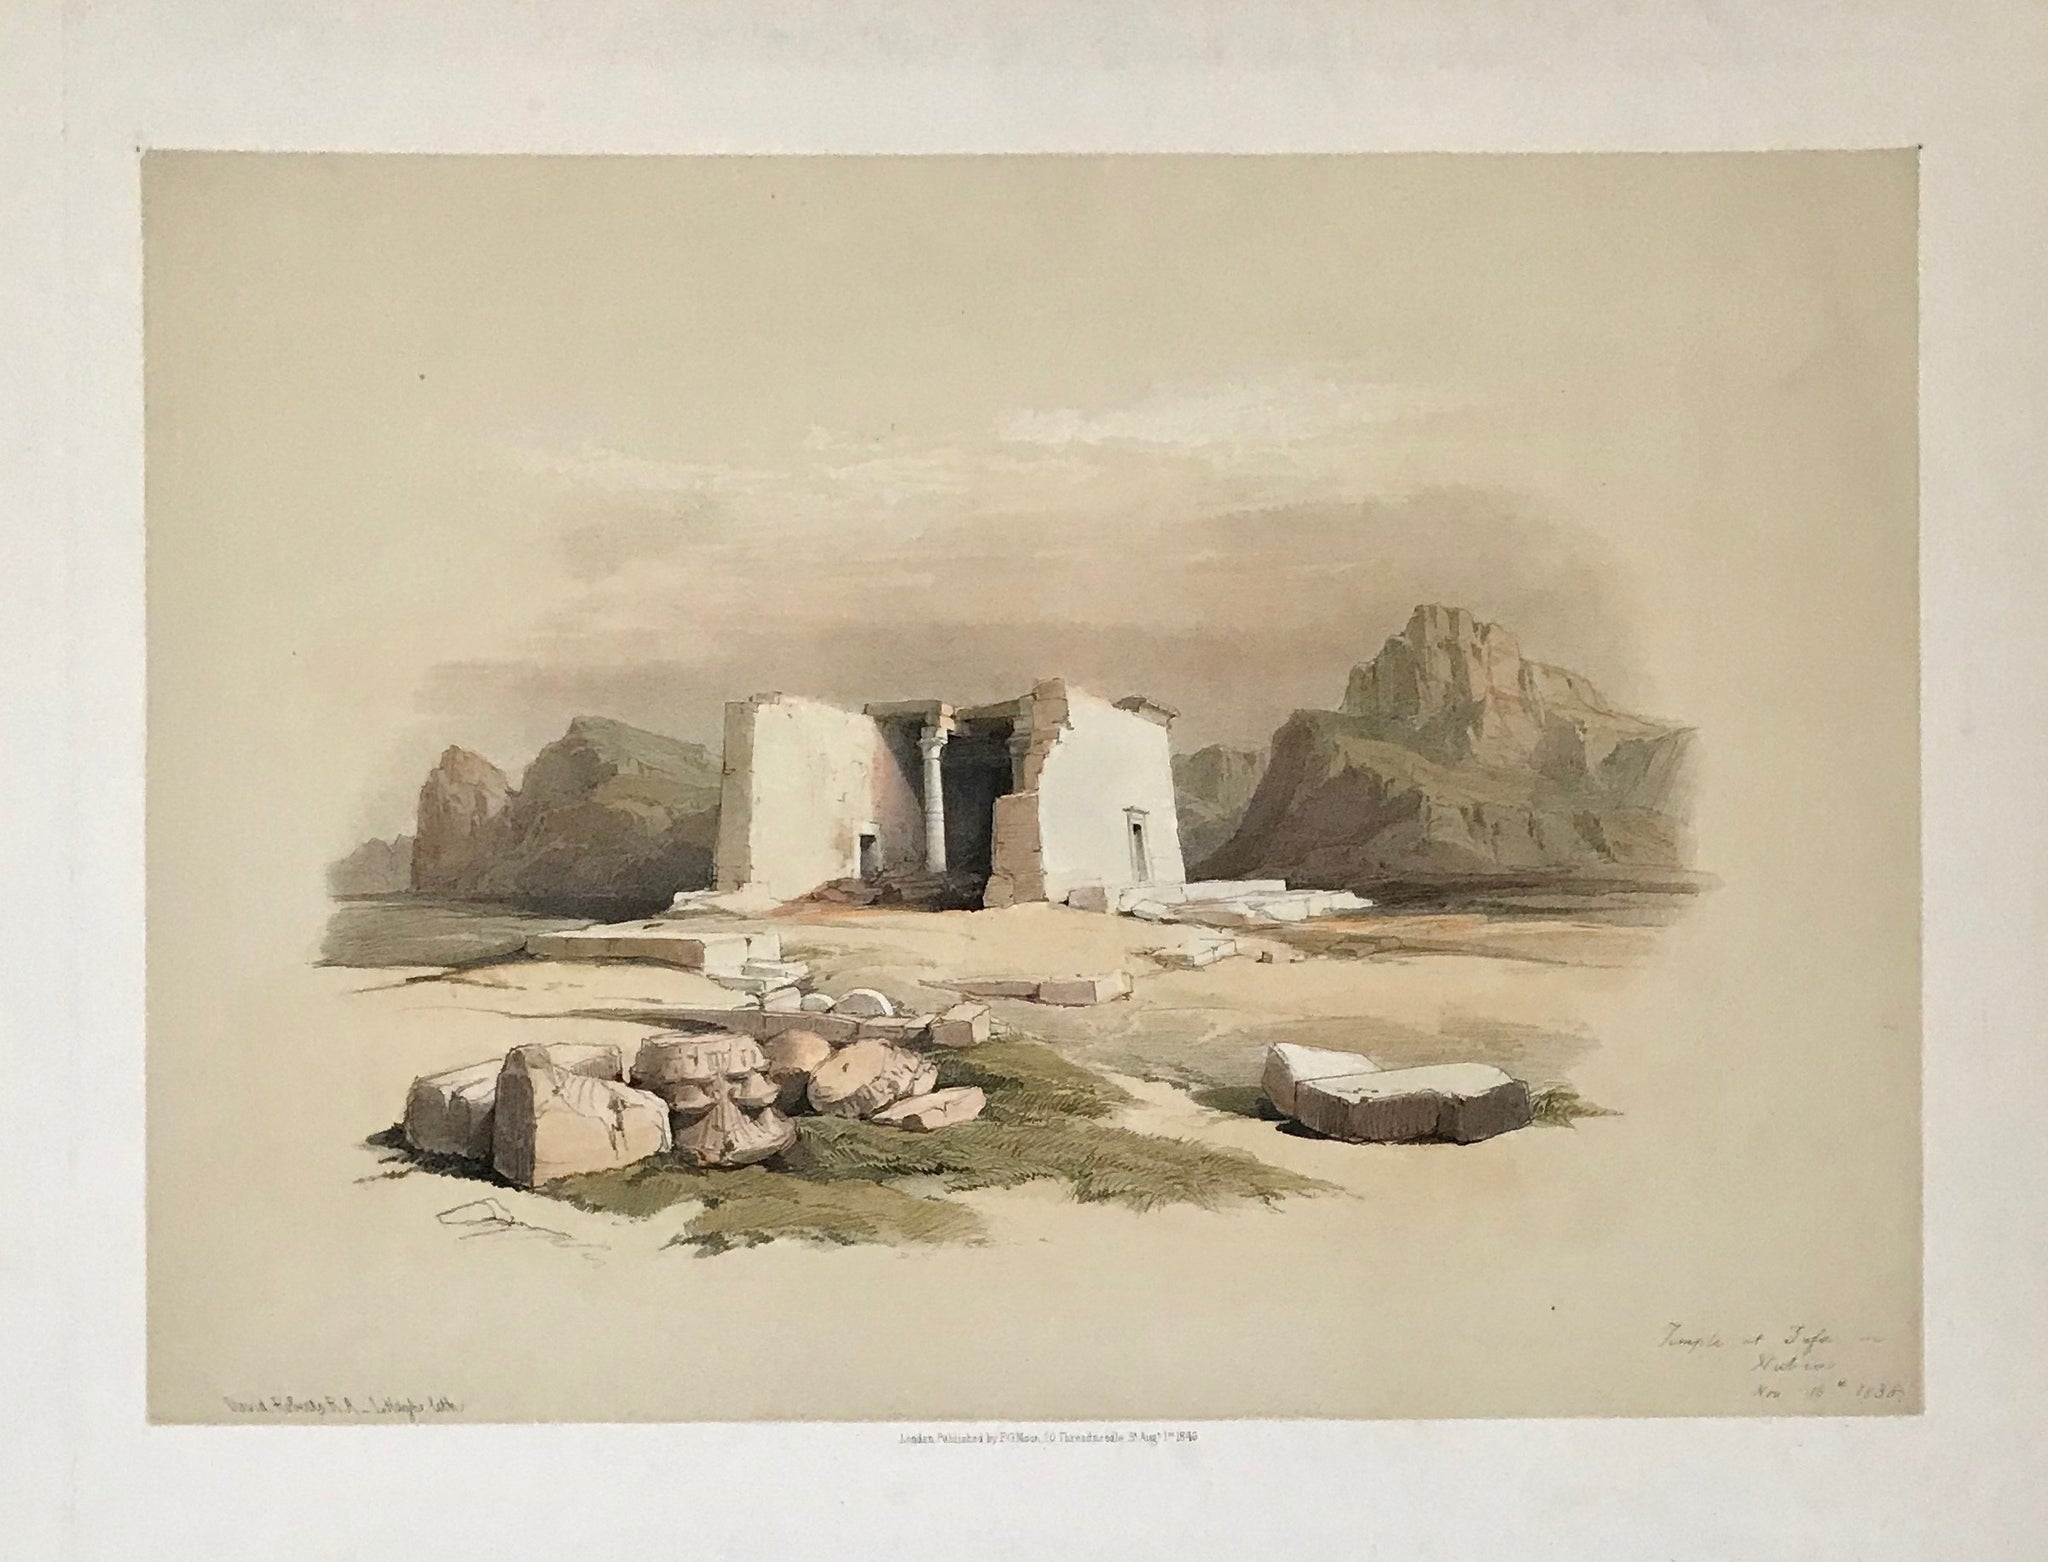 Taffeh. - "Temple of Tafa in Nubia"  Hand-colored lithograph from "Egypt and Nubia" Published in London 1849 and , ãThe Near East and the Holy Land" by David Roberts (1796 - 1864). Published in London 1842 - 1849  The Temple was professionally taken down and given to the Rijksmuseum in Leiden, The Netherlands as an appreciation of the Dutch in helpen save Egyptian antiquities.